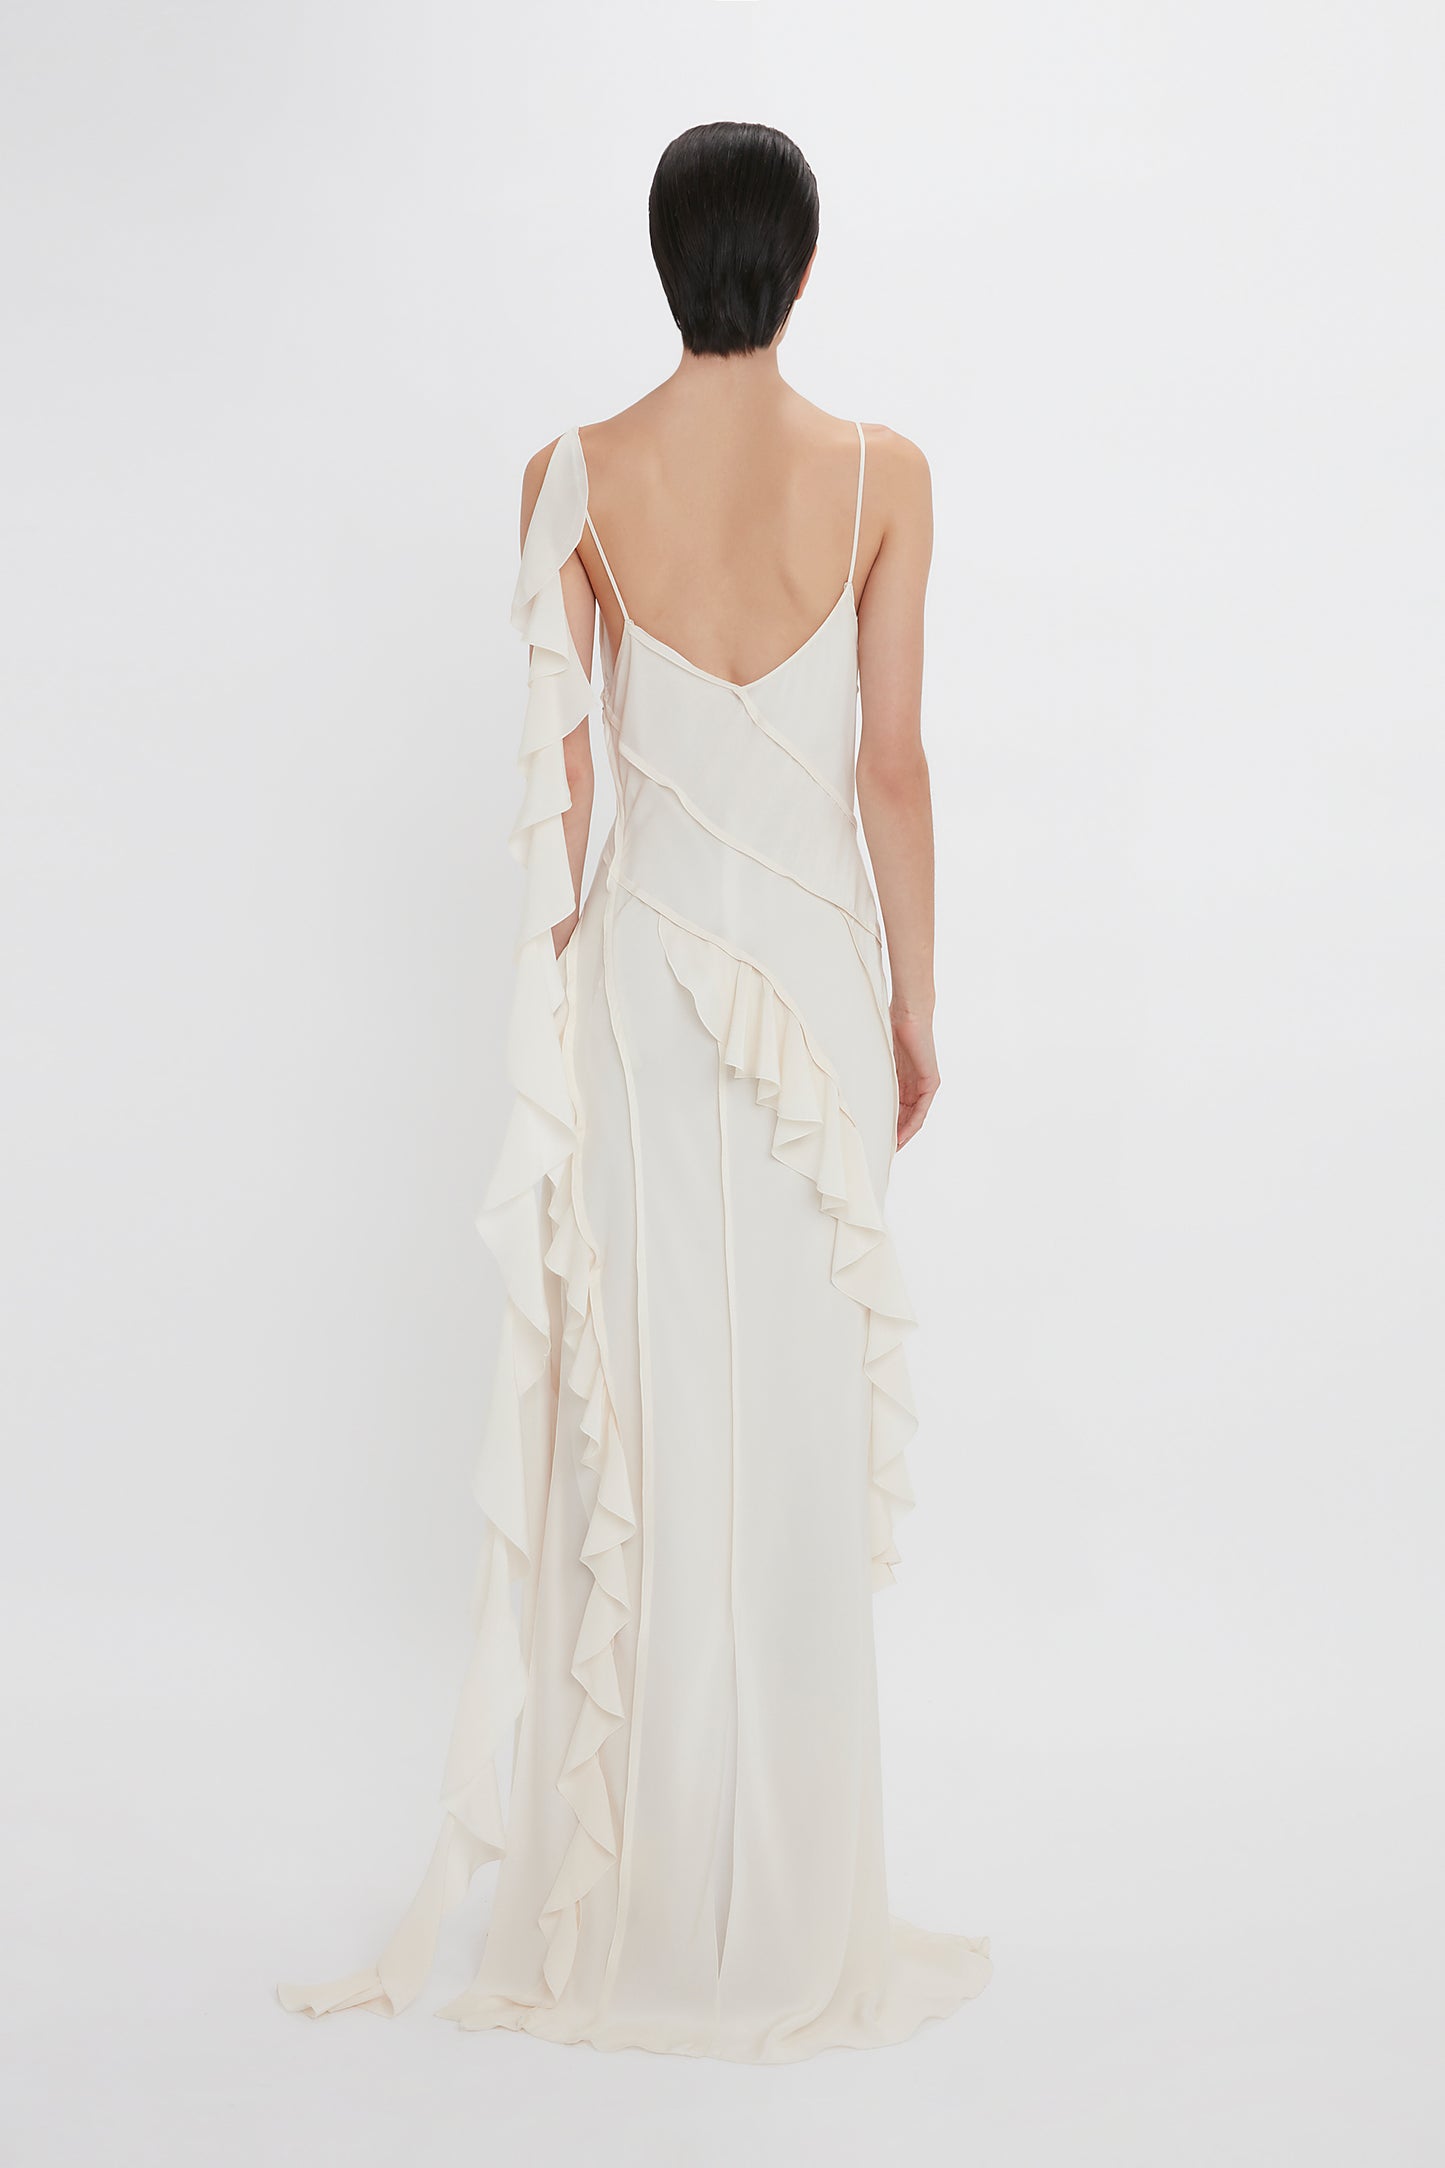 A woman in an Exclusive Asymmetric Bias Frill Dress In Ivory by Victoria Beckham, with lace detailing on the back, standing against a white background.